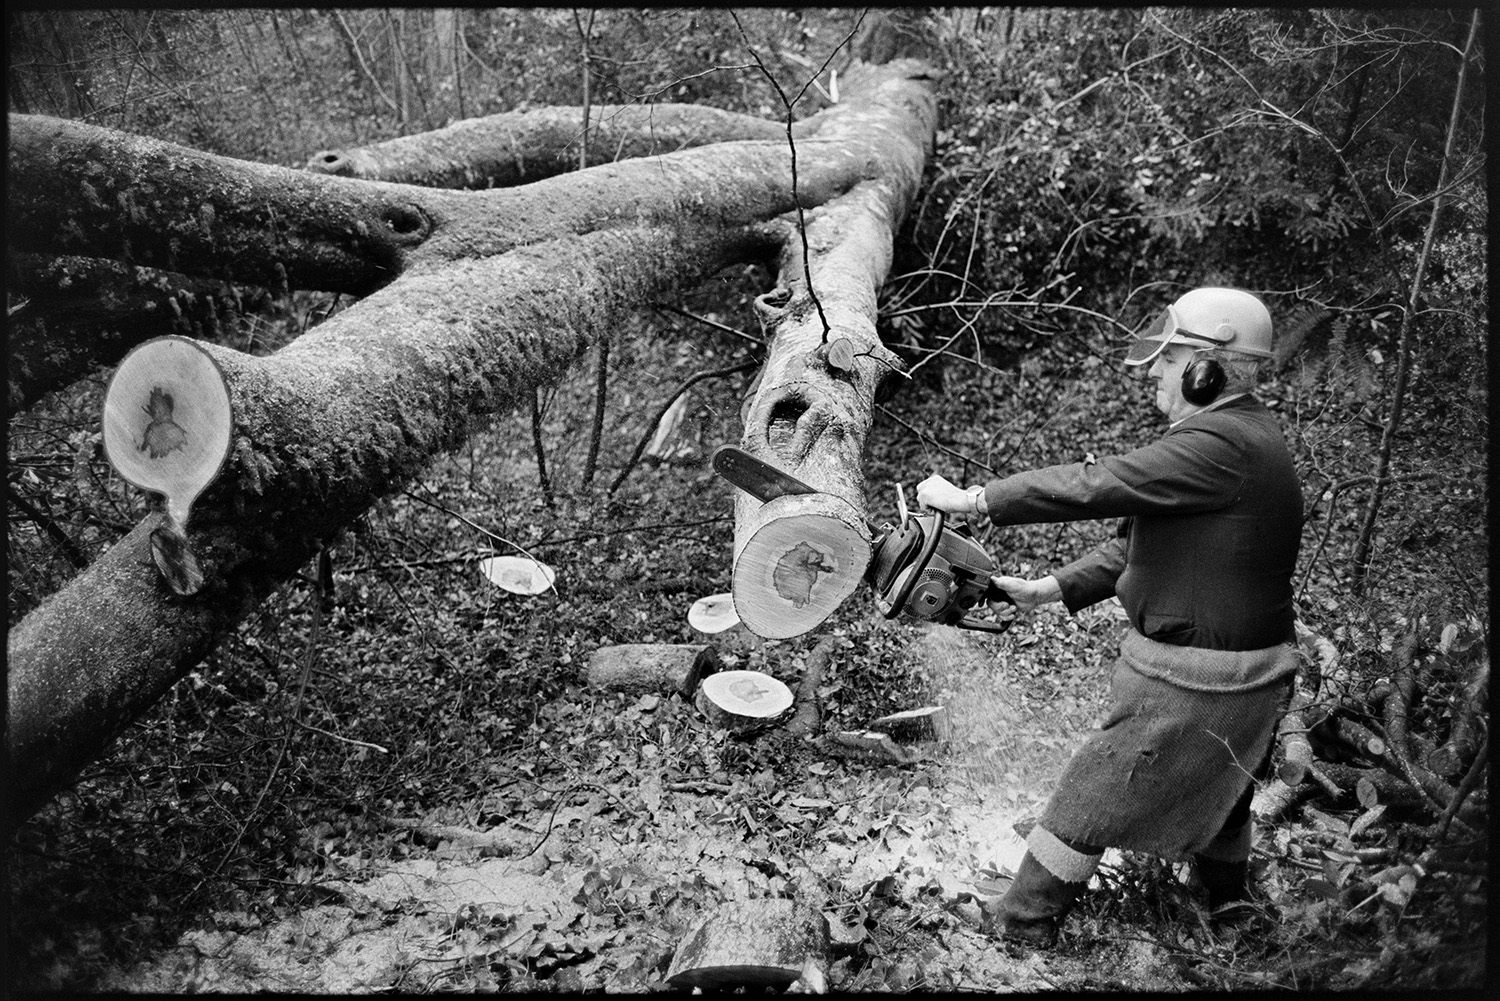 Man sawing up tree with chainsaw.
[Horace Baker cutting up a tree trunk with a chainsaw at Halsdon, Dolton. He is wearing a sack around his waist and a protective helmet. Sawdust can be seen falling from the chainsaw.]